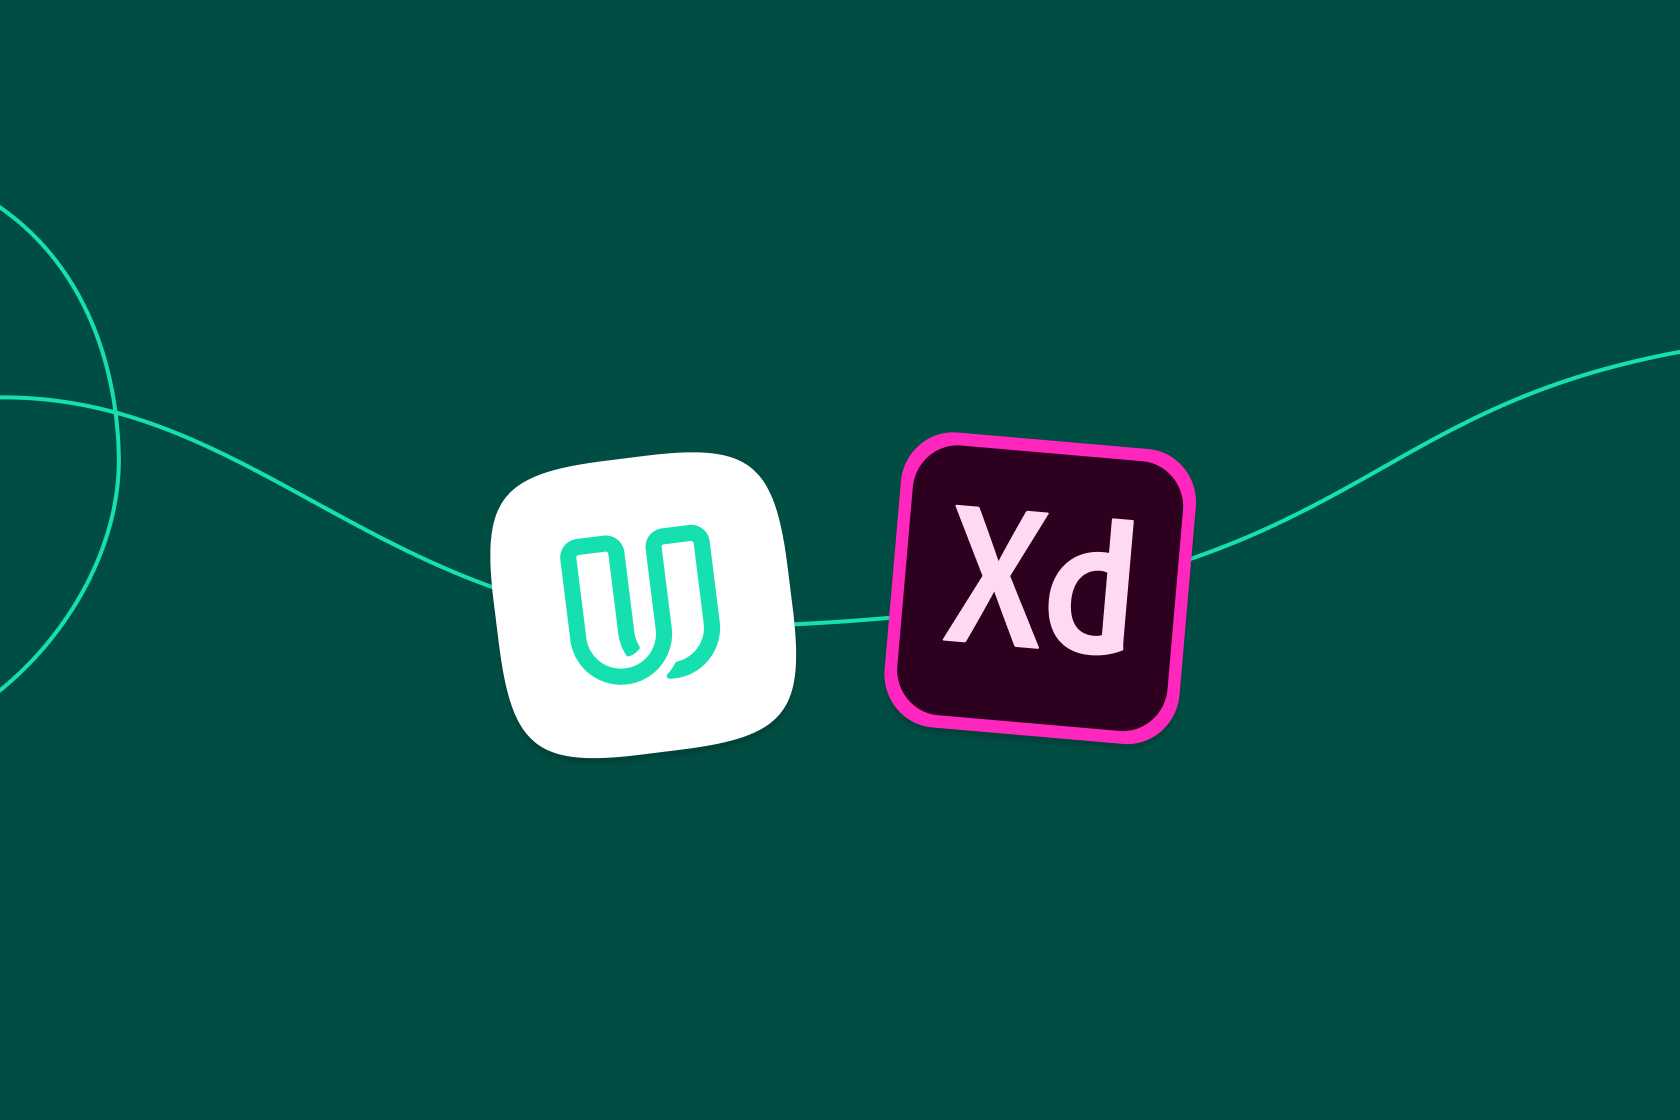 Userbrain and Adobe XD